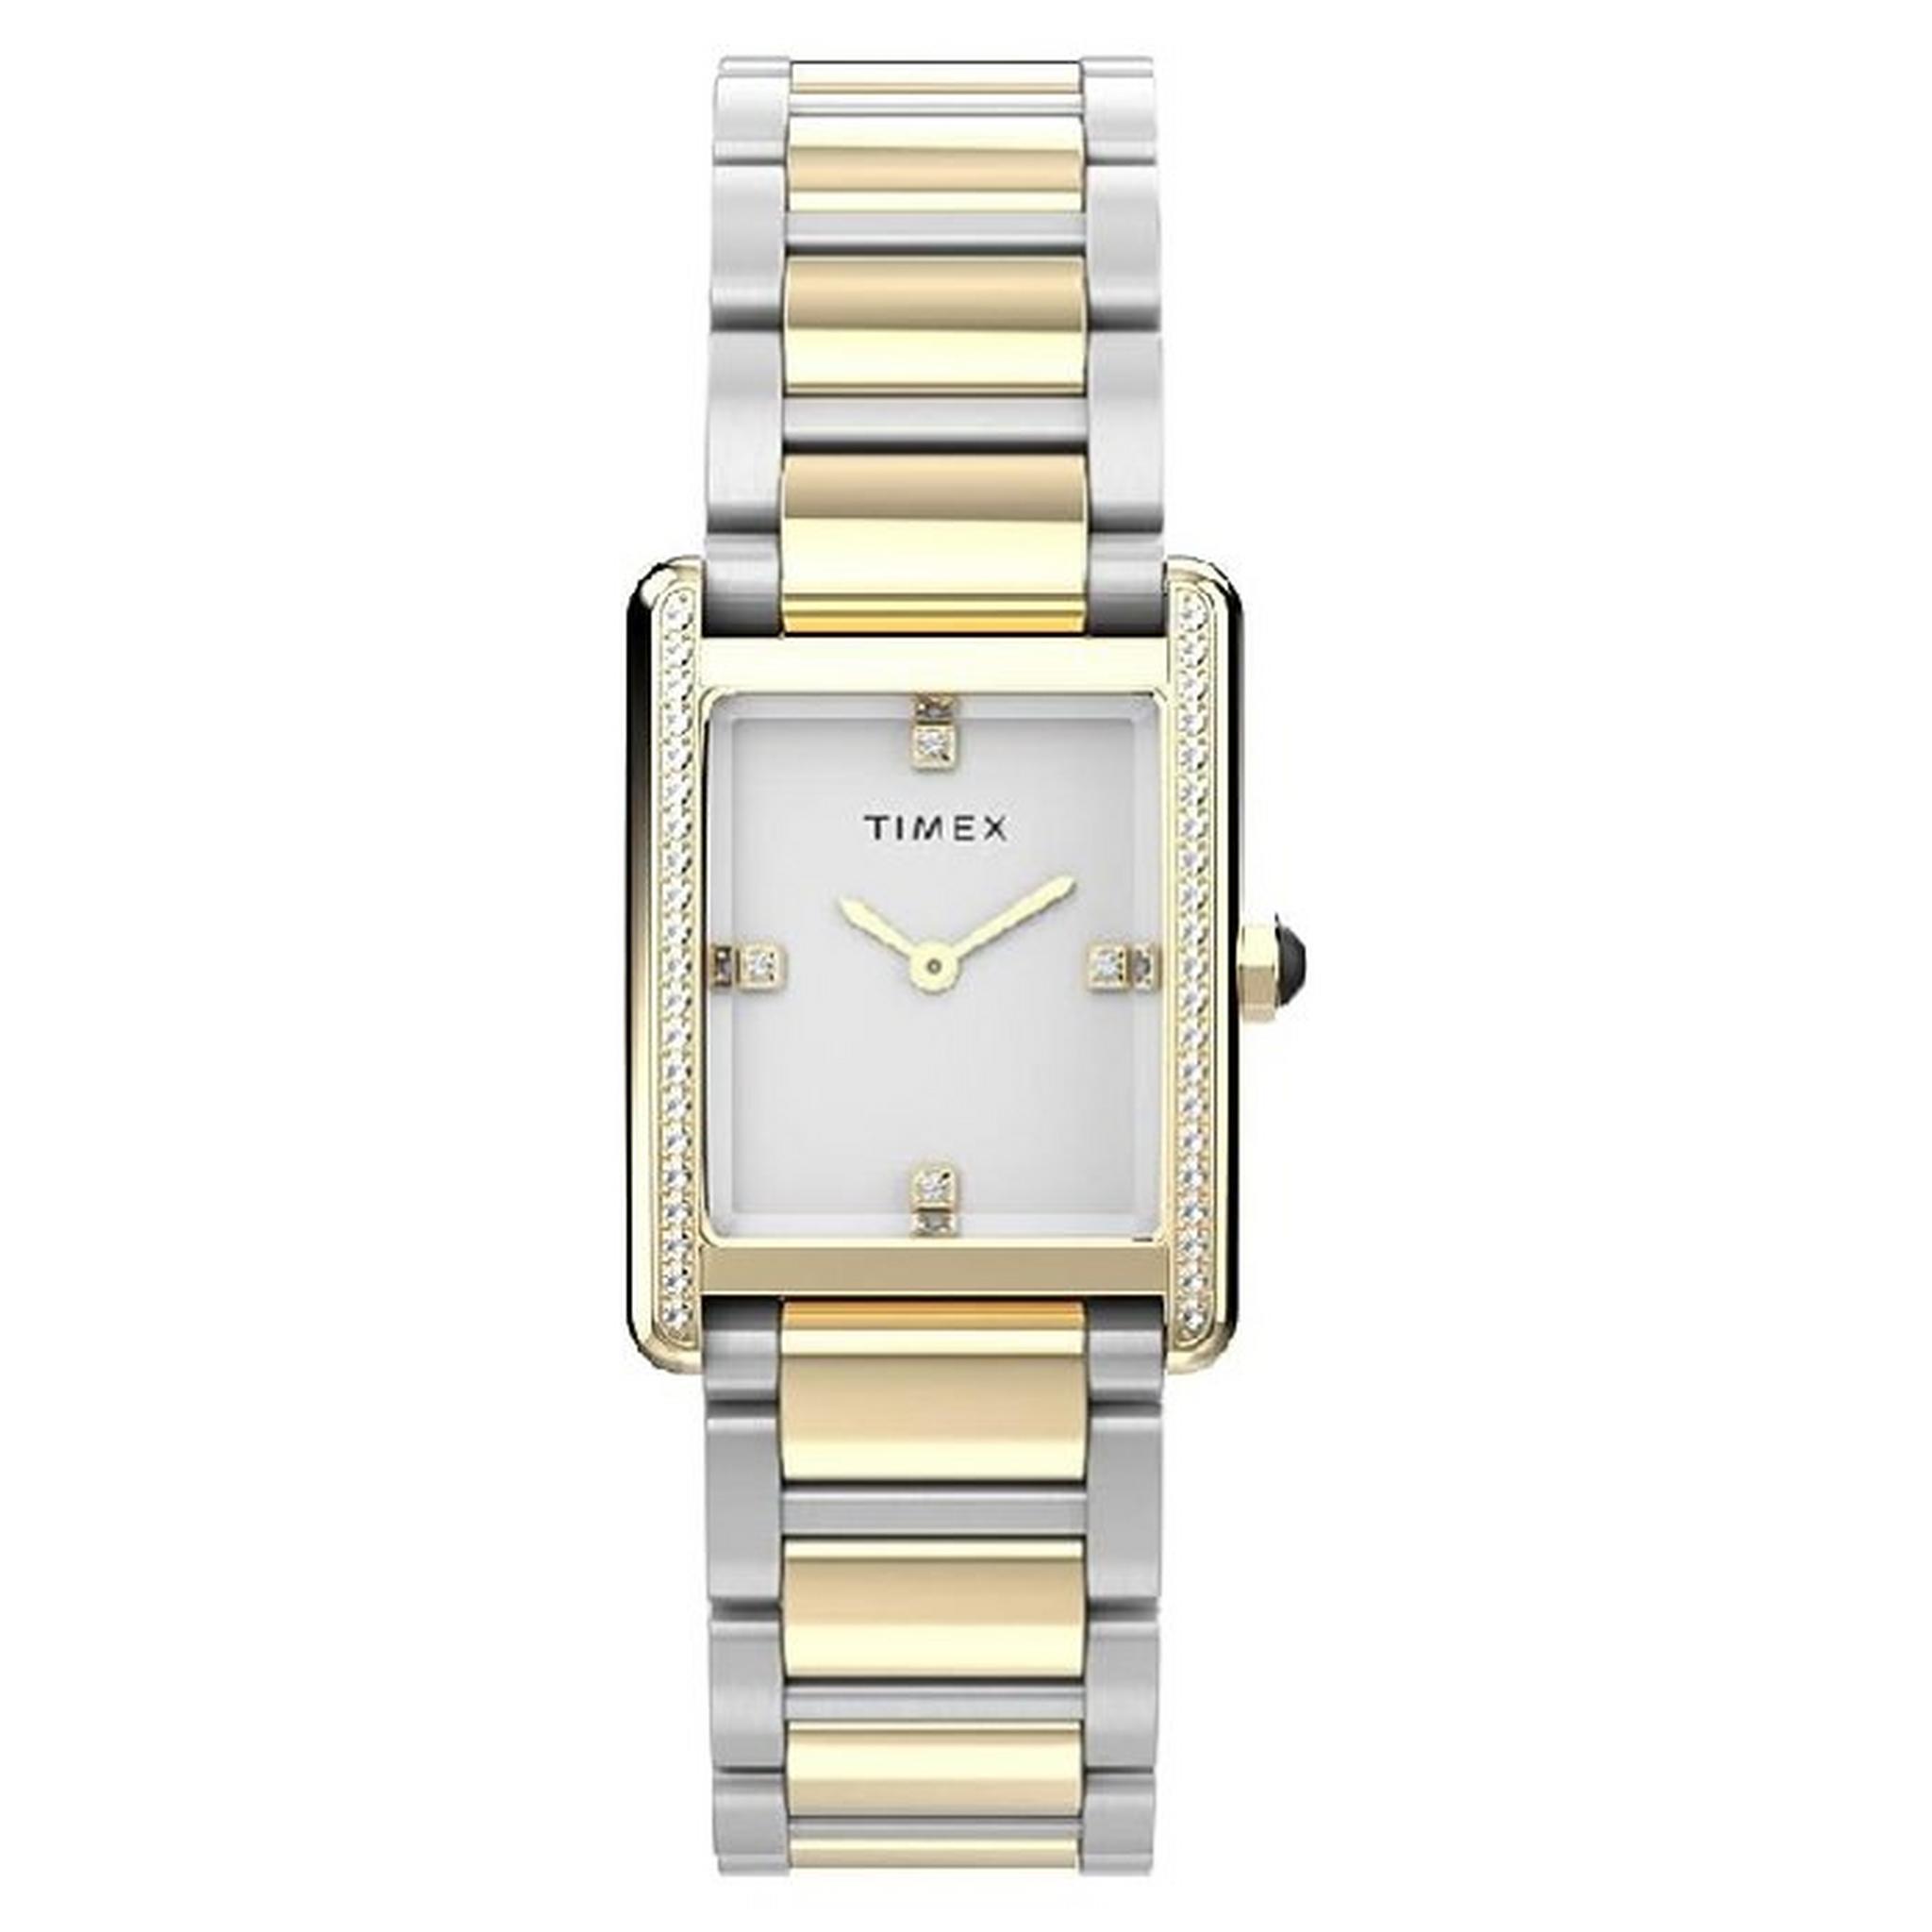 Timex Watch for Women, Analog, Stainless Steel Band, 24mm, TW2V81300 - Silver/Gold